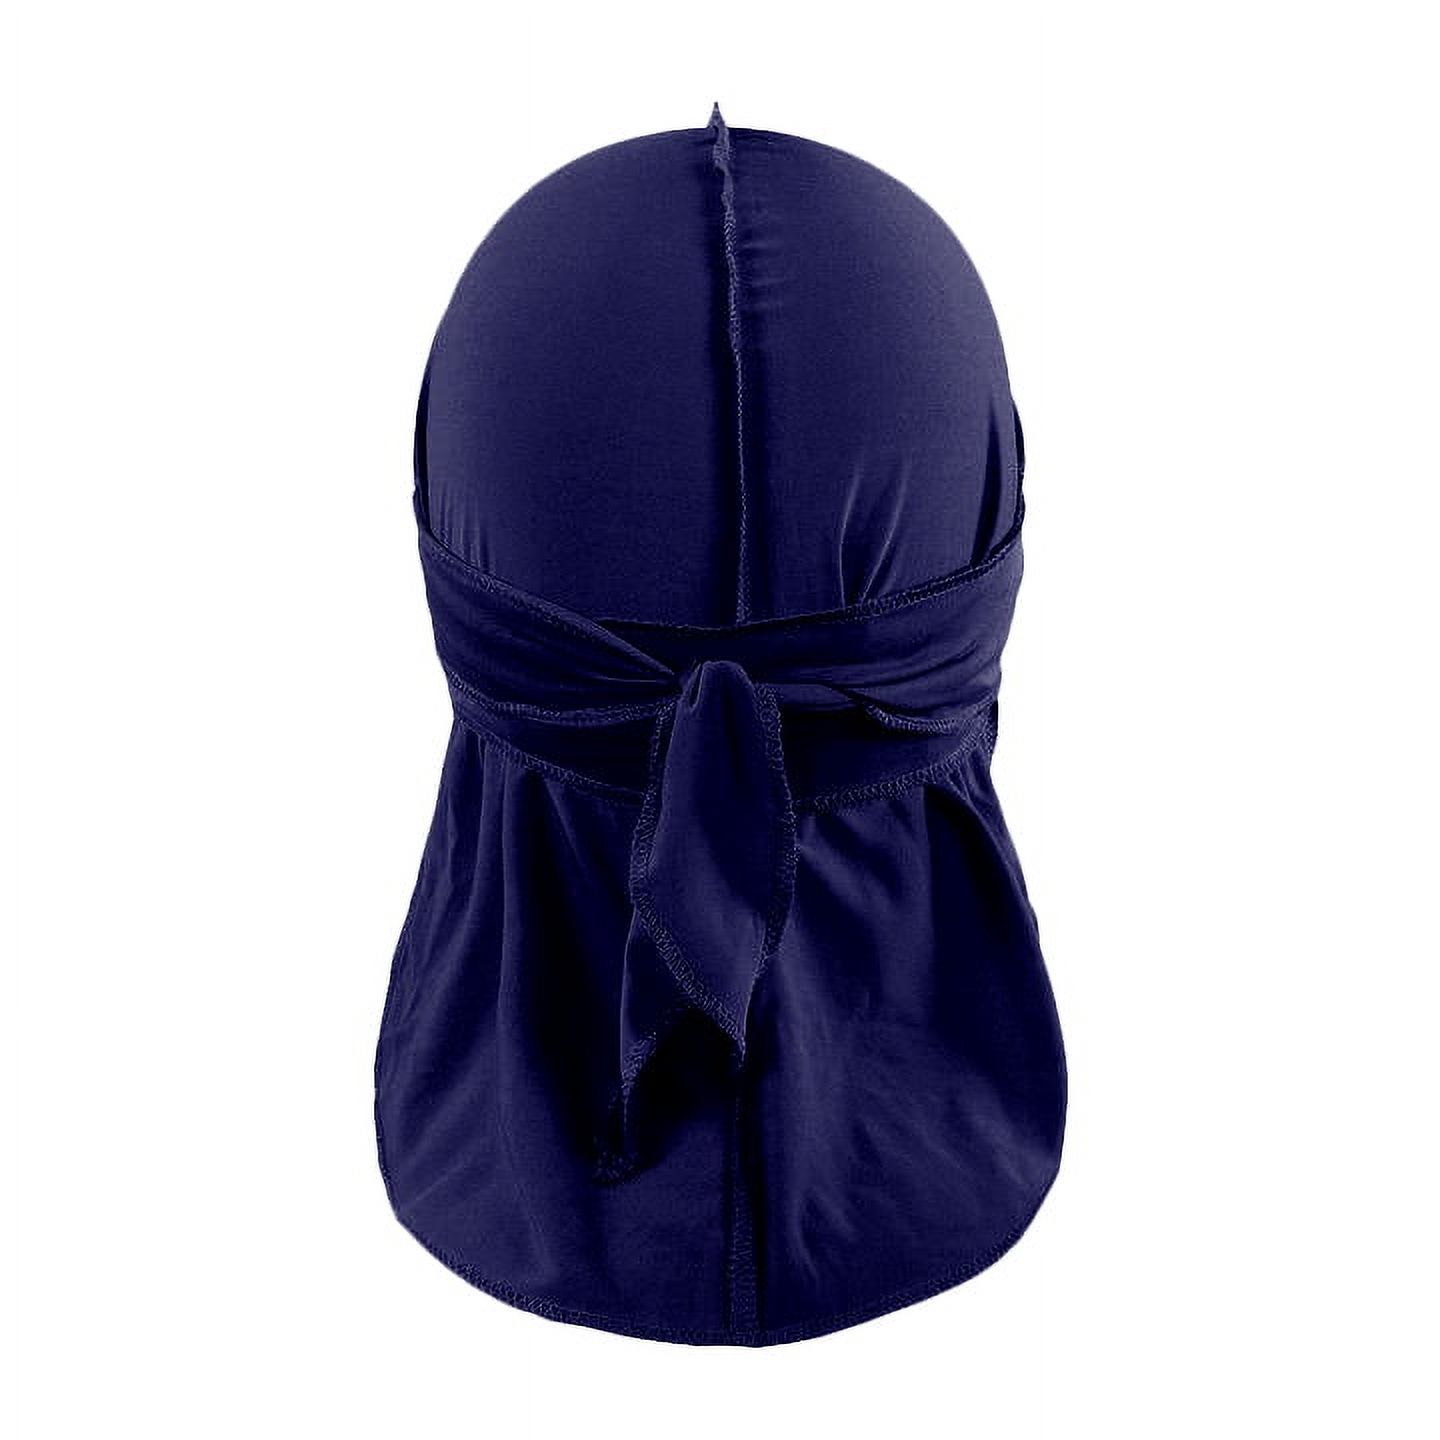 Pack of 3 Durags Headwrap for Men Waves Headscarf Bandana Doo Rag Tail (Navy Blue) - image 2 of 4